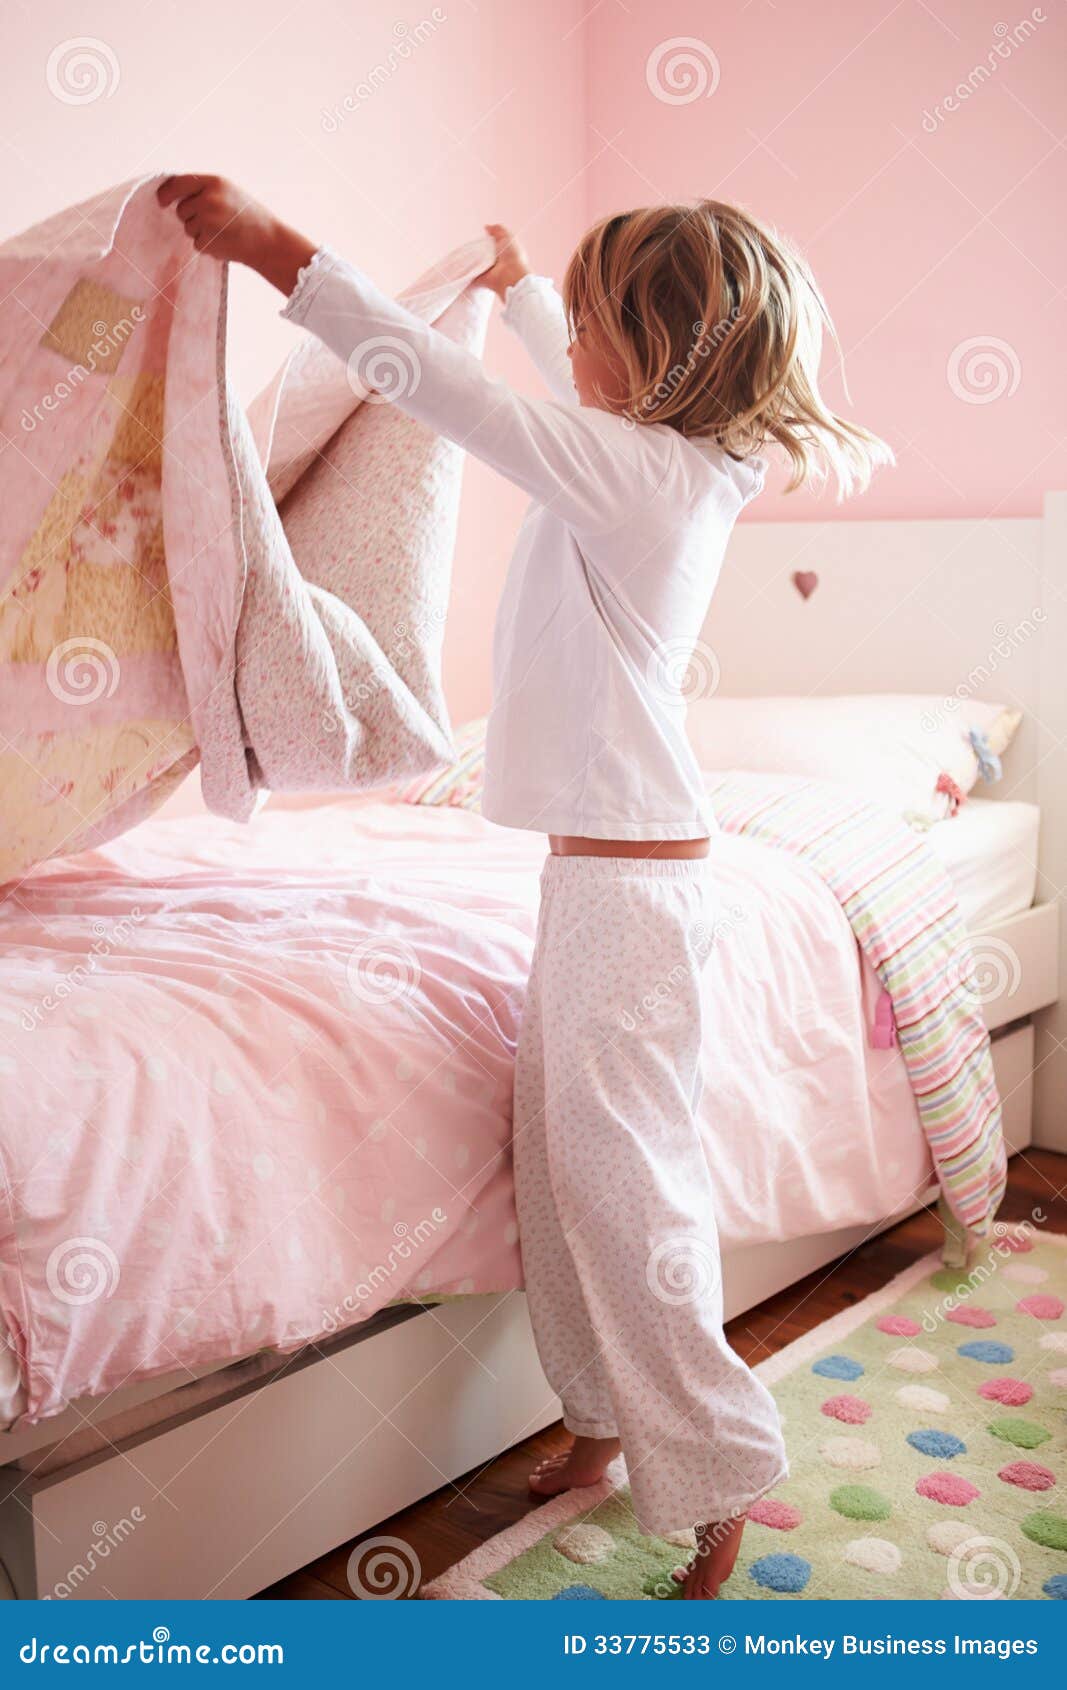 young girl making her bed